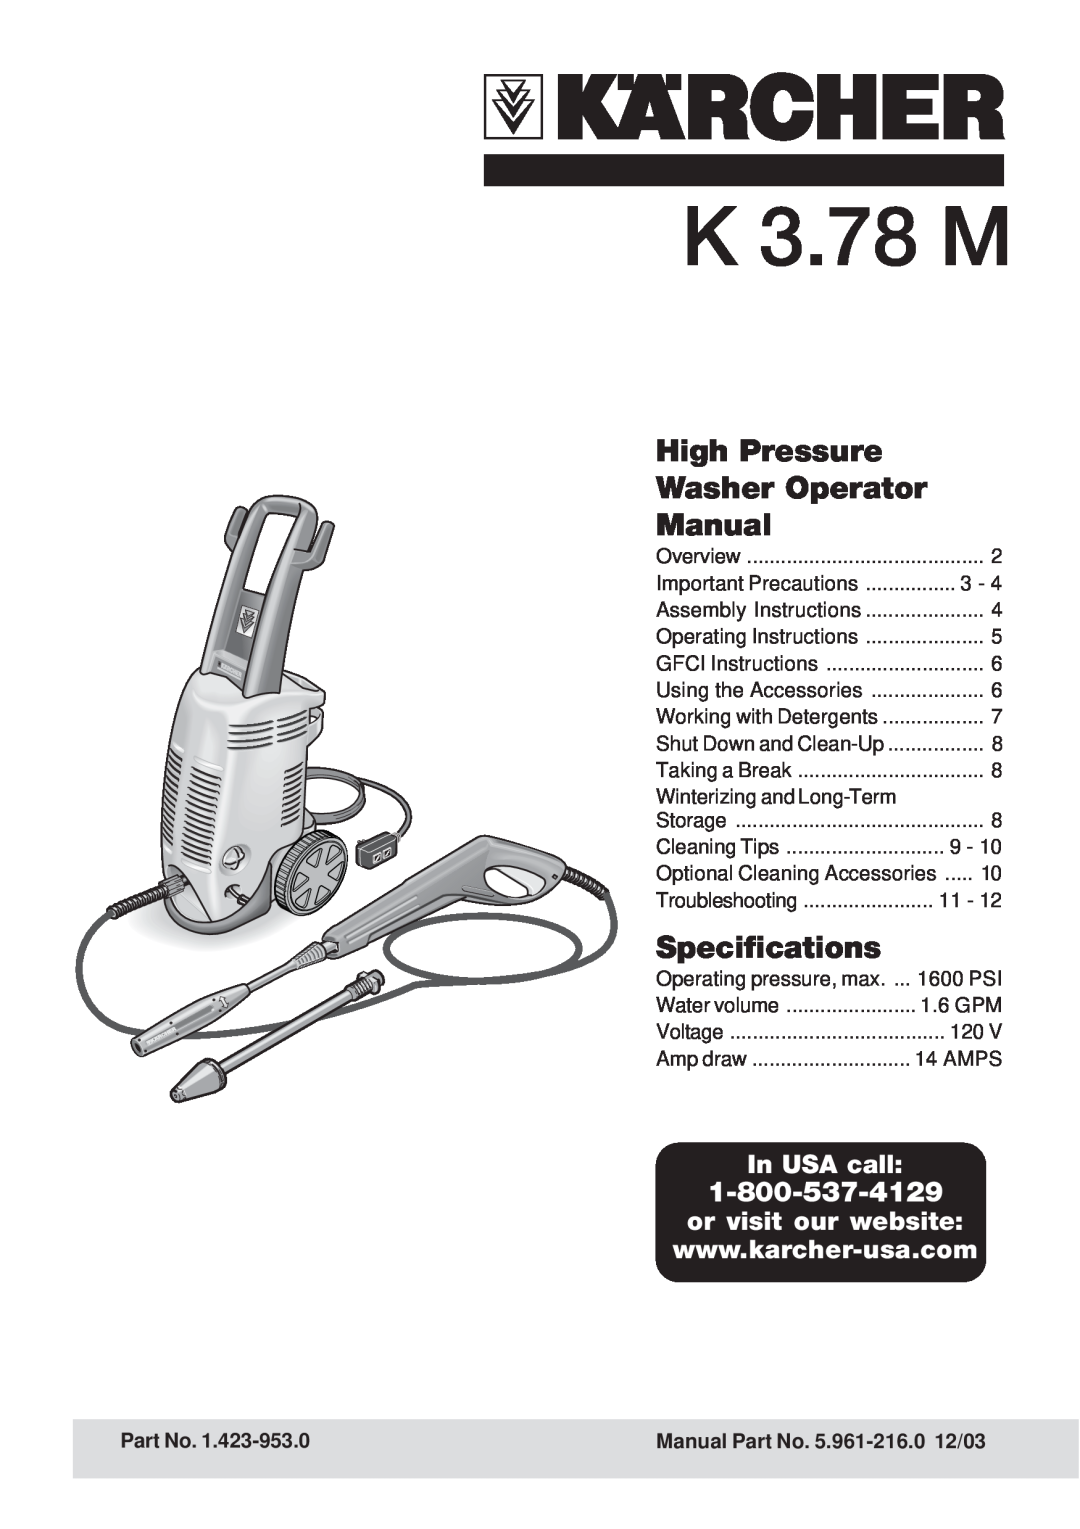 Karcher specifications High Pressure Washer Operator Manual, Specifications, 1-800-537-4129, In USA call, K 3.78 M 